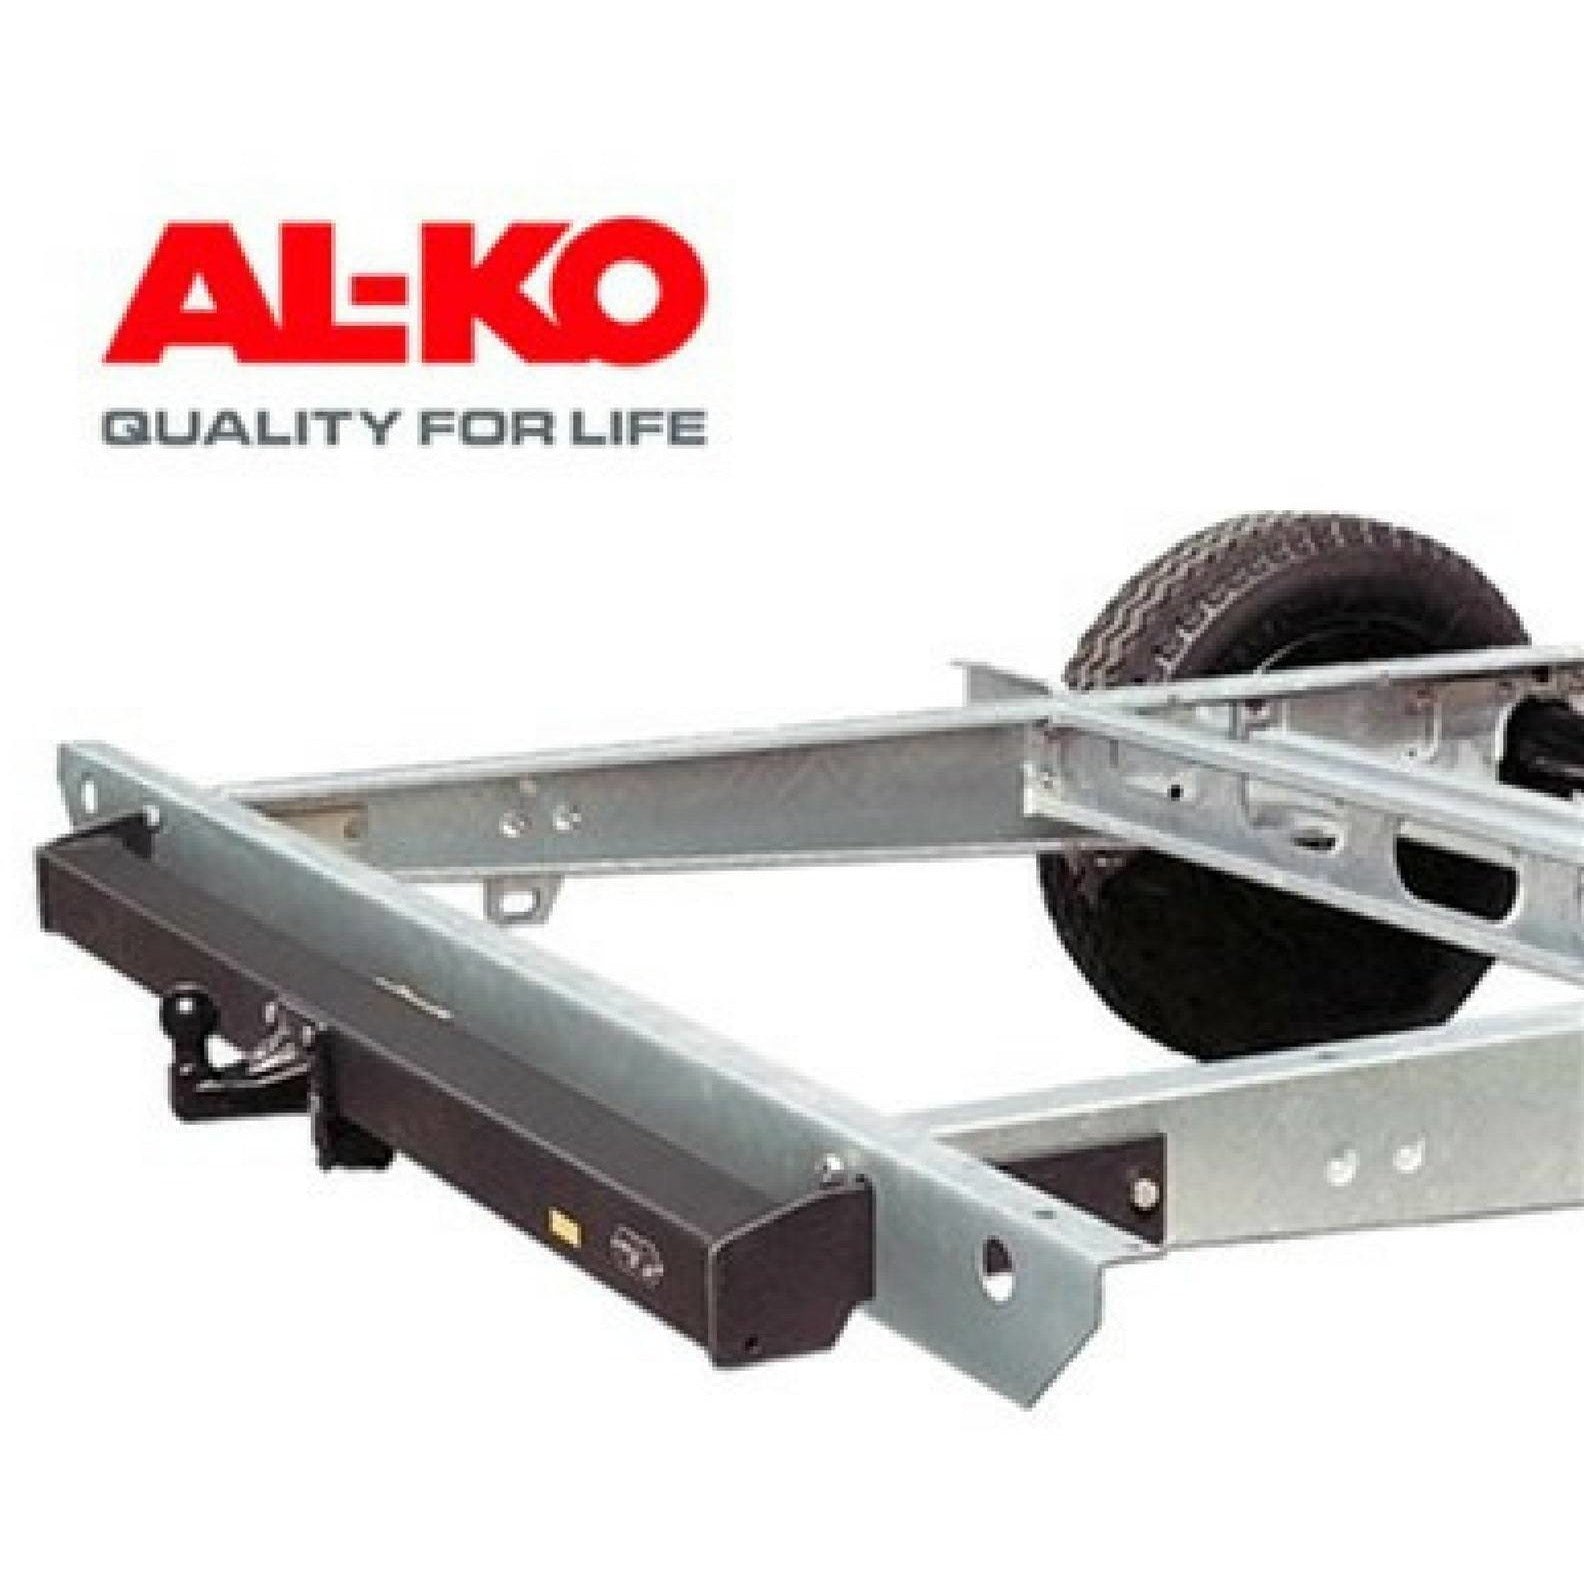 ALKO Towbar Assembly (1620181) made by ALKO. A Towing sold by Quality Caravan Awnings